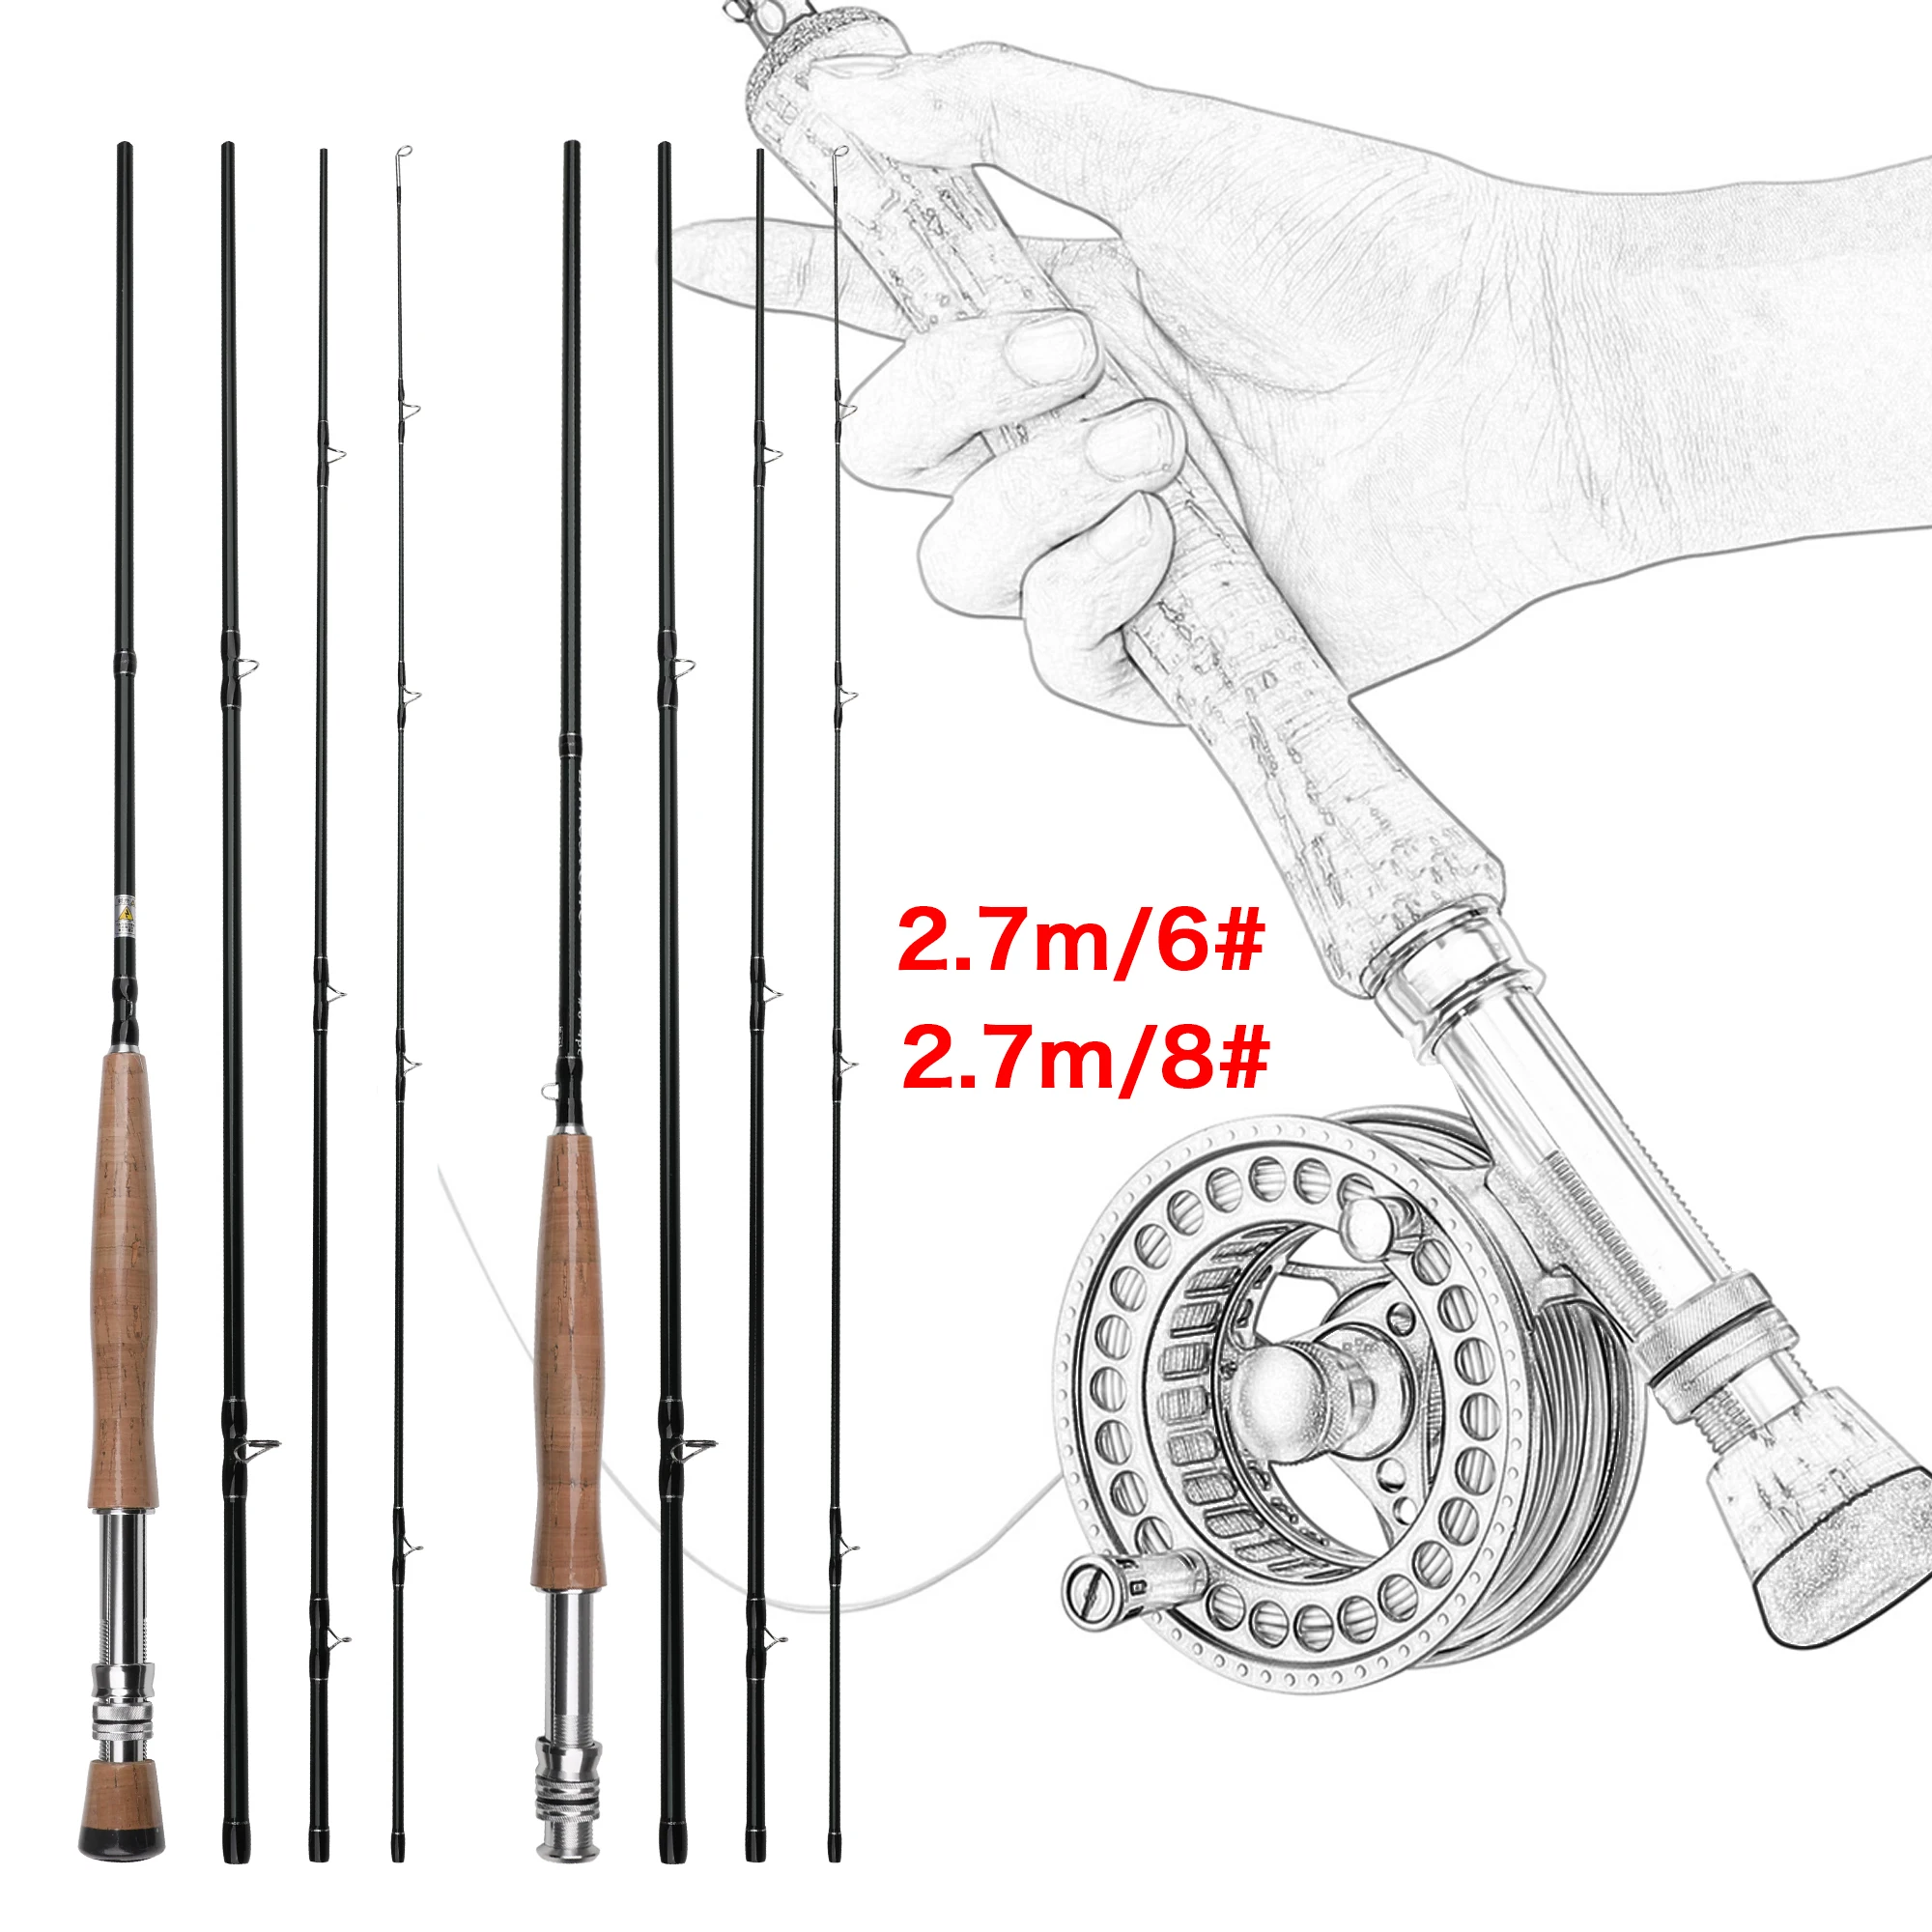 BIUTIFU PHISHGER Fly Fishing Rod 9FT 6#/ 8# Light Weight Travel 100%Carbon Fiber Medium Fast Flying Trout River Stream Lure Pole images - 6